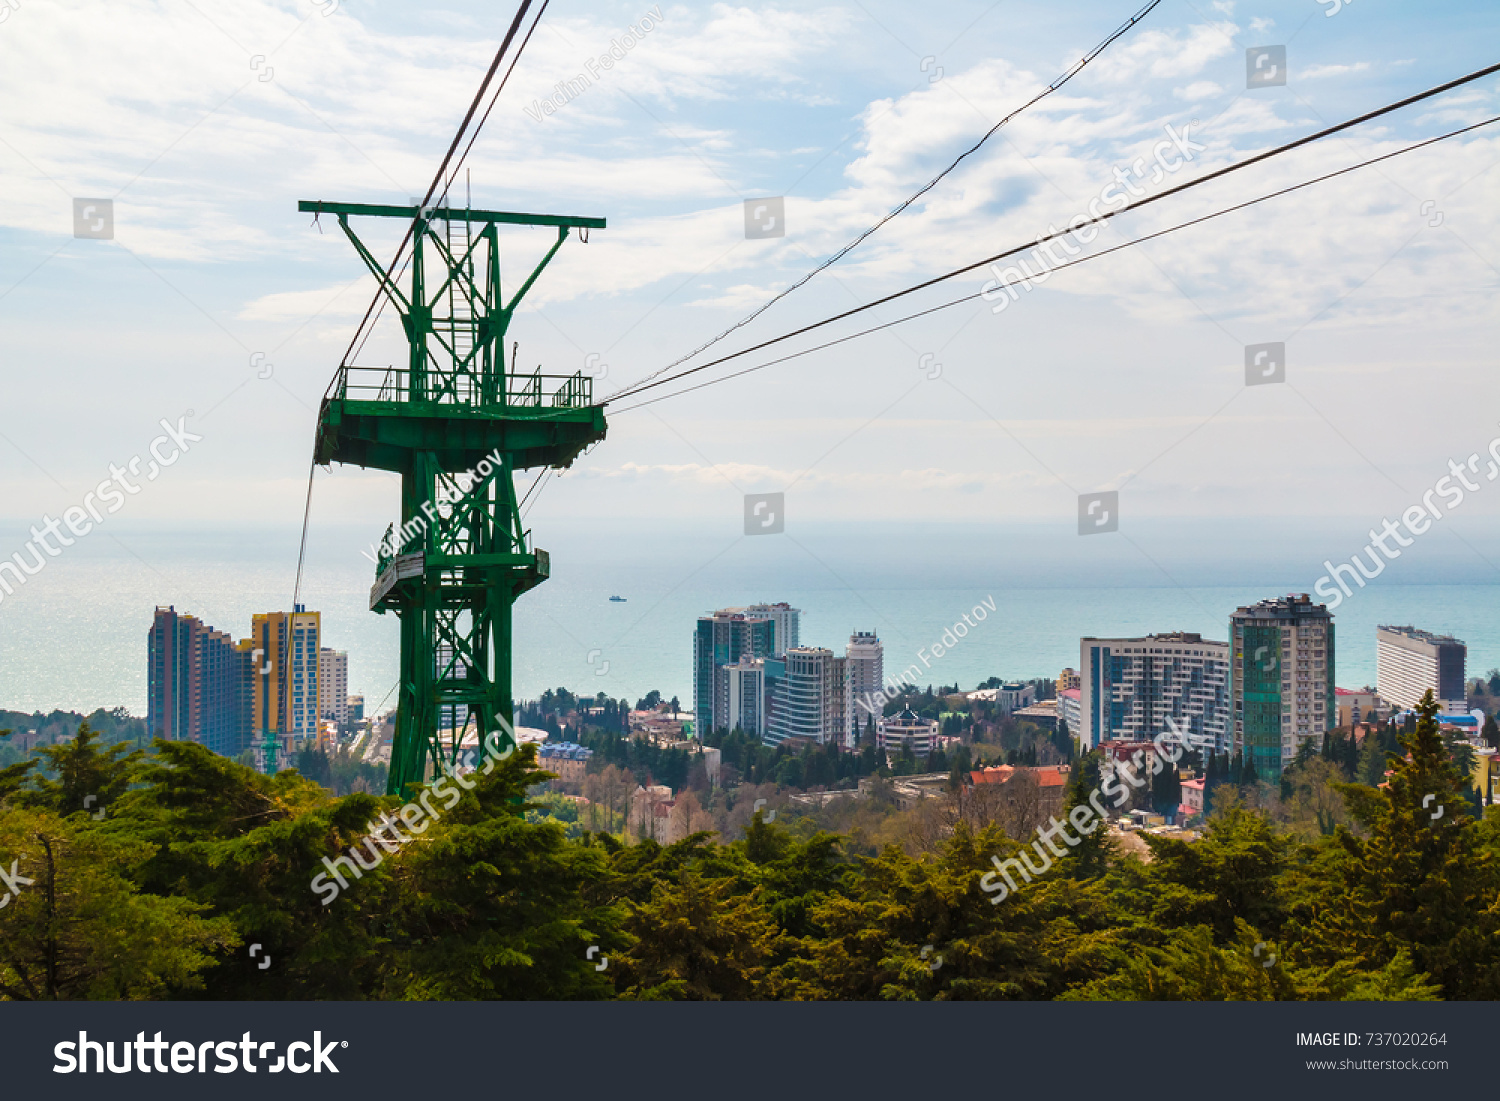 The cableway over the city on the background of the sea in sunny day, Sochi, Russia #737020264